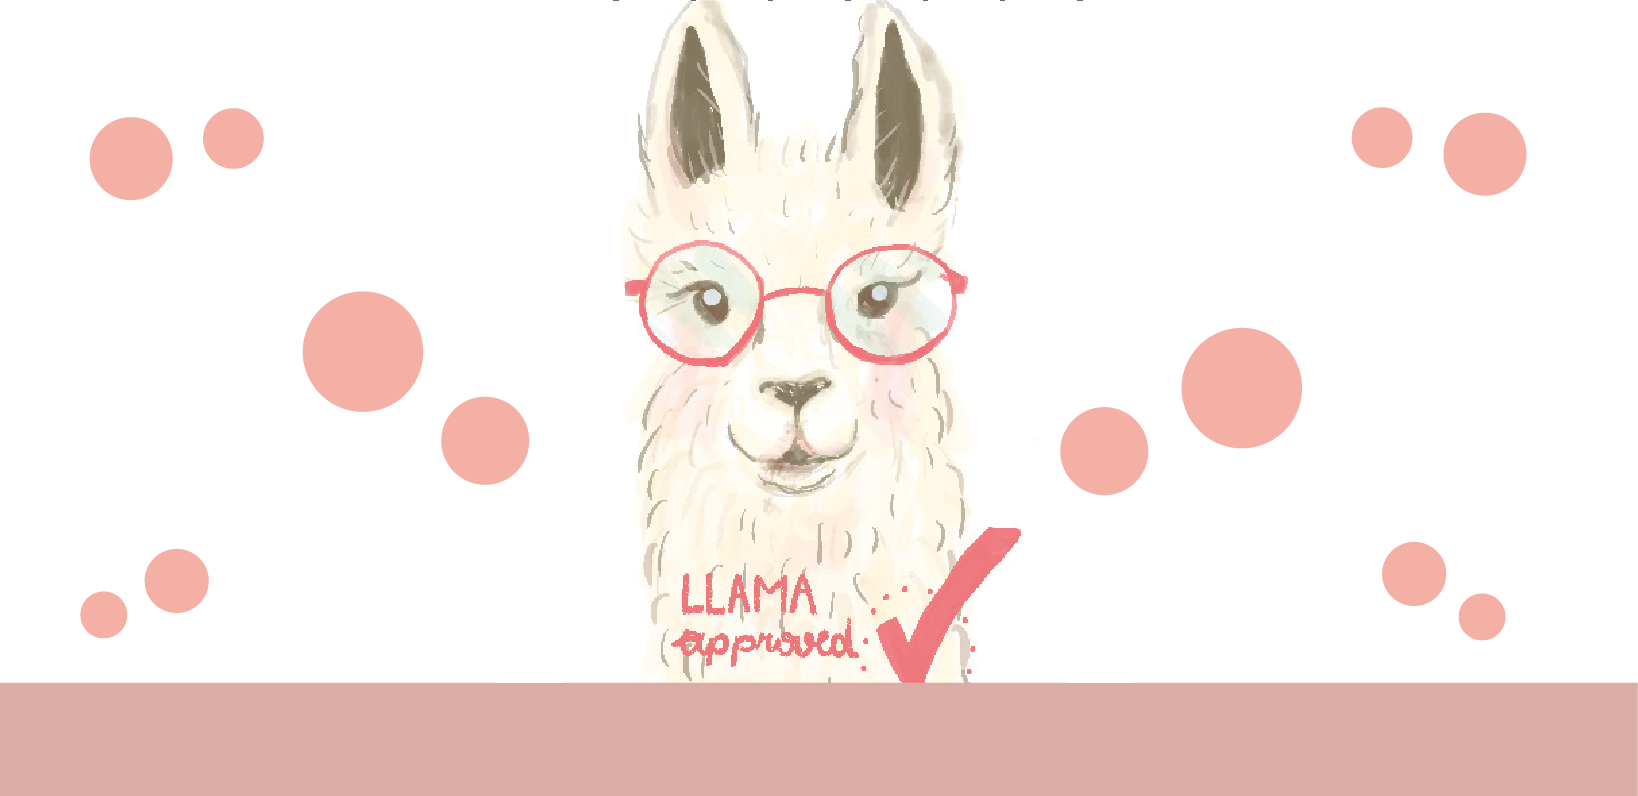 Drawing of a llama with the inscription "LLAMA approved".